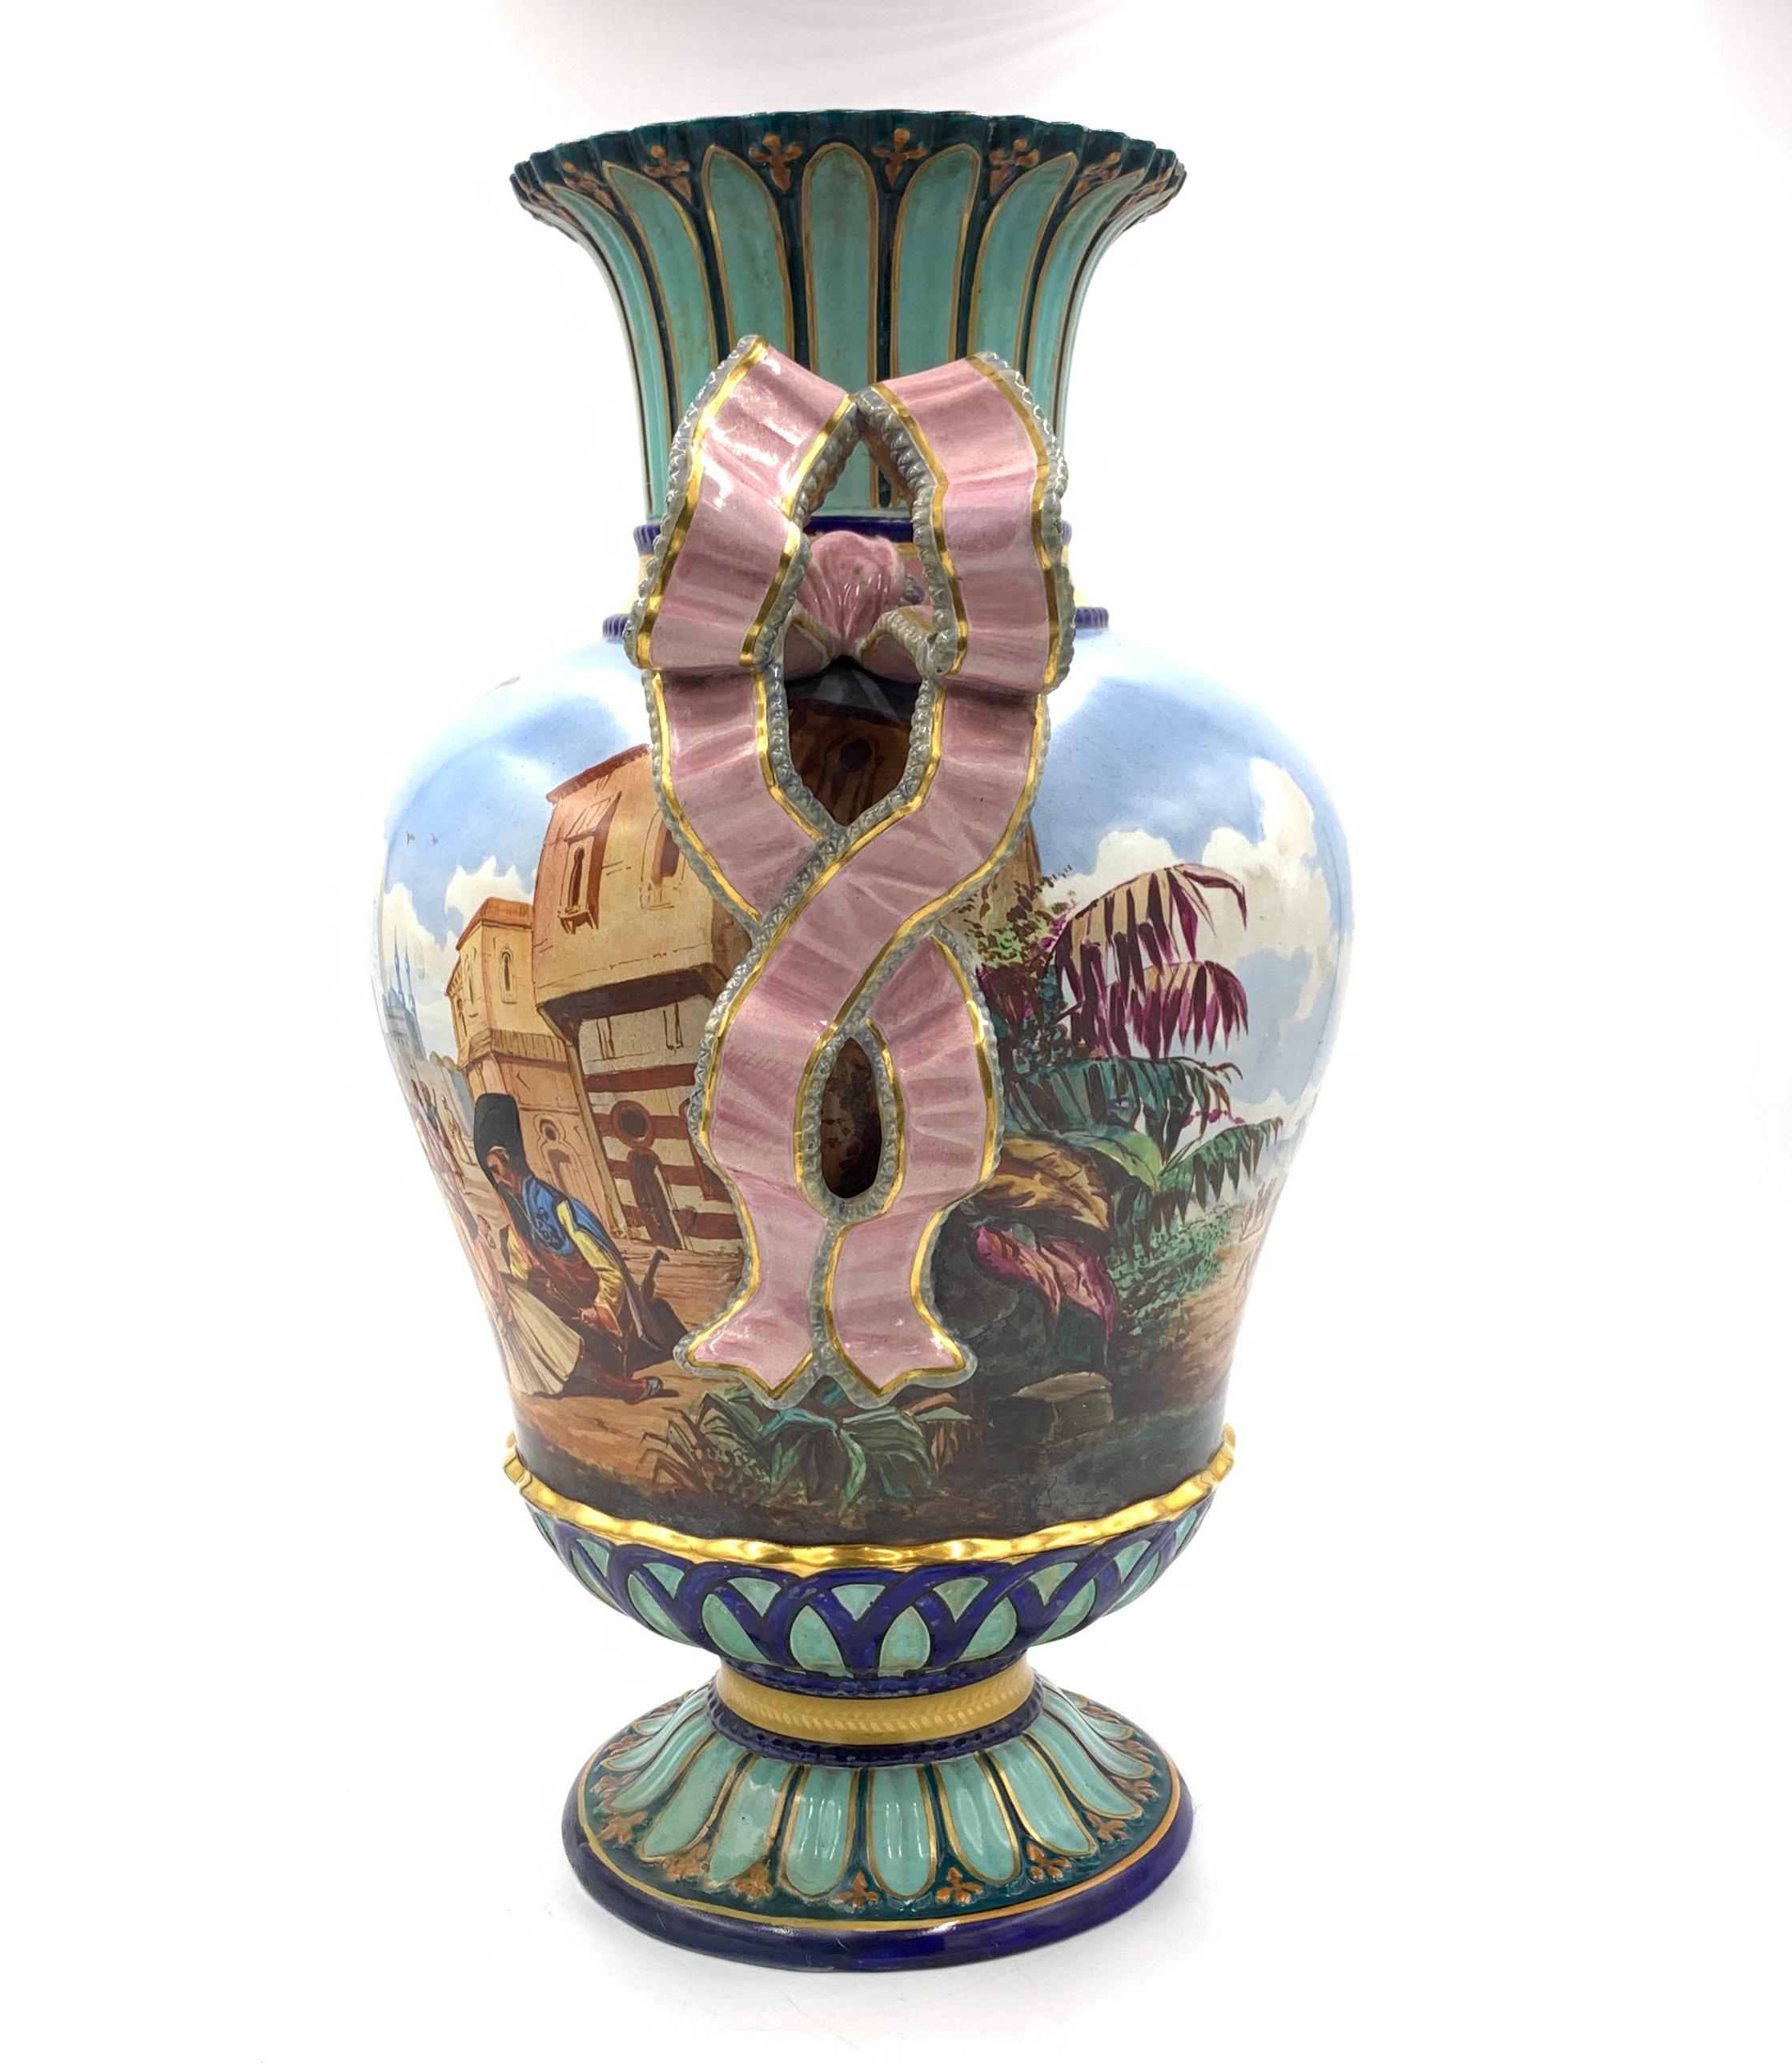 The front of the ovoid body depicts Arab men speaking with a women in the market surrounded by building and mosques while the reverse of the vase depicts a horseman in an empty land surrounded by palm trees. 

